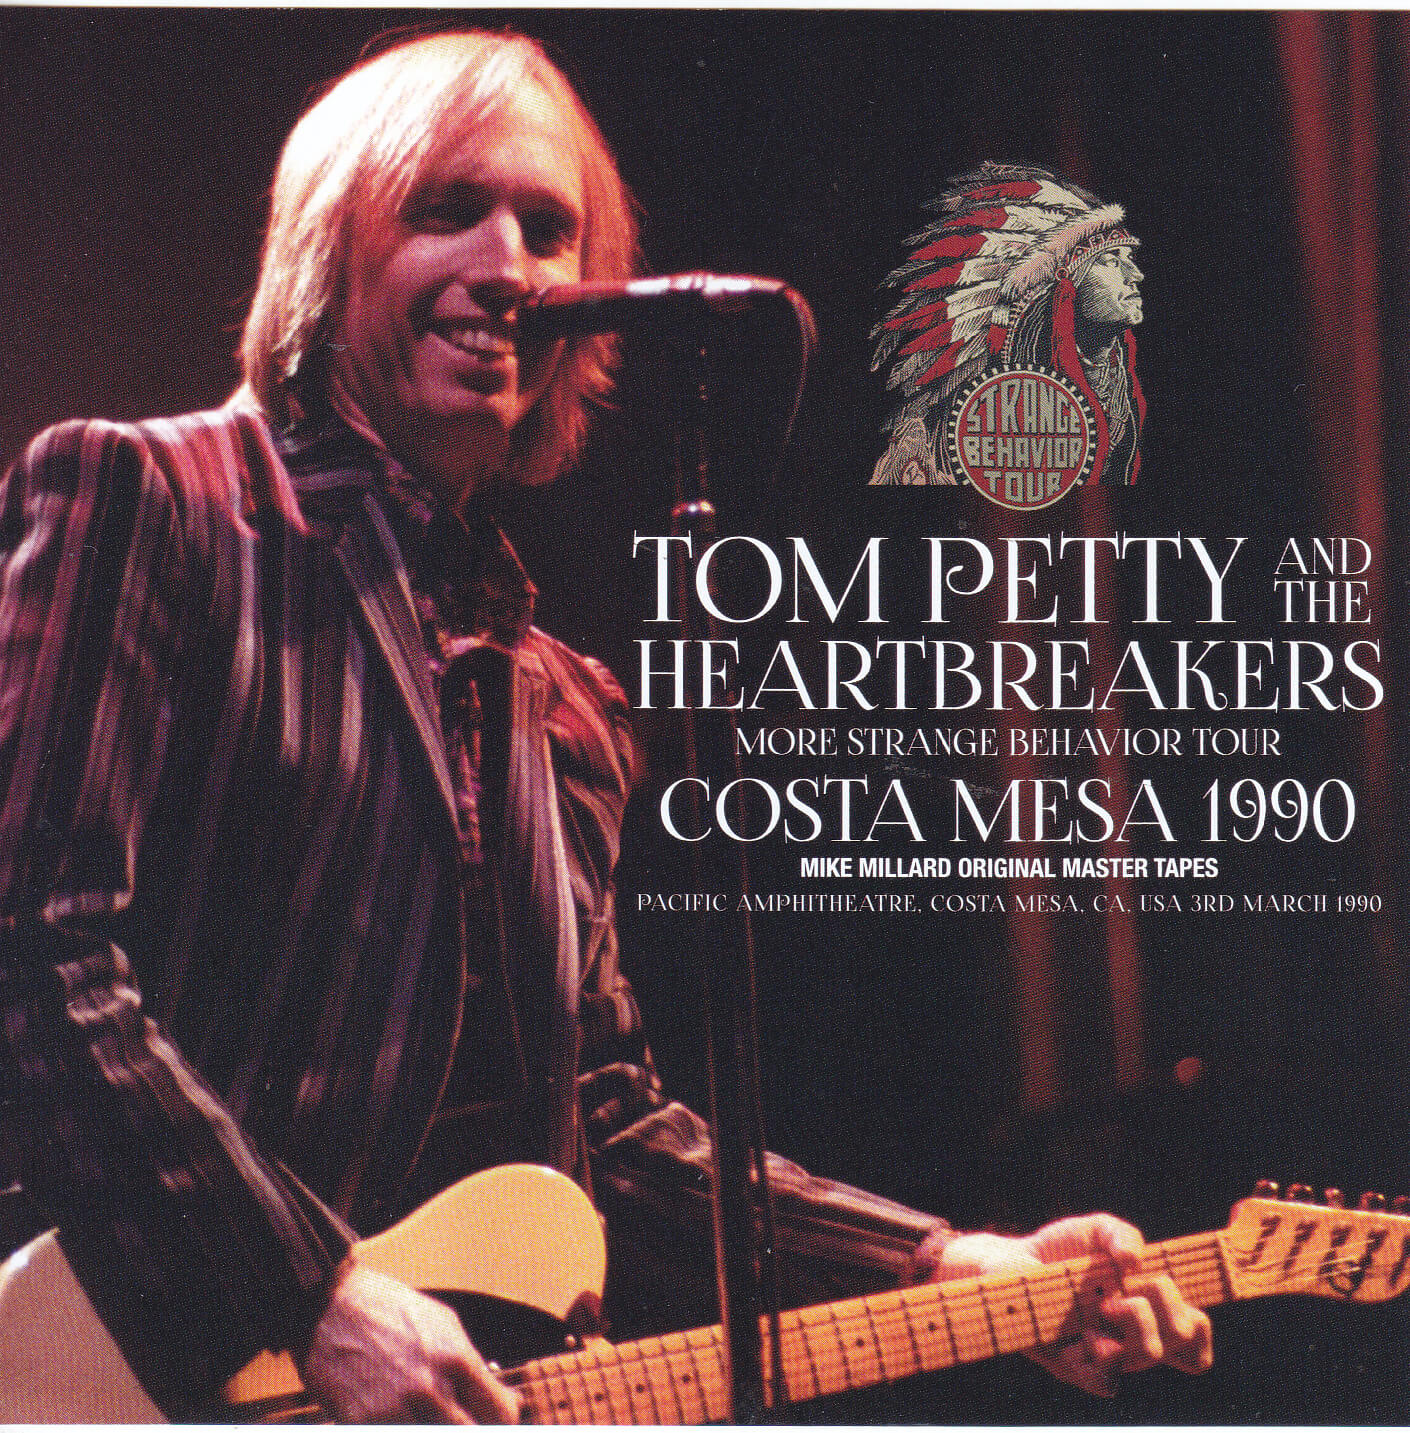 PETTY TOM - AND THE HEARTBREAKERS - MORE STRANGE BEHAVIOR TOUR: COSTA MESA 1990 - LIMITED EDITION